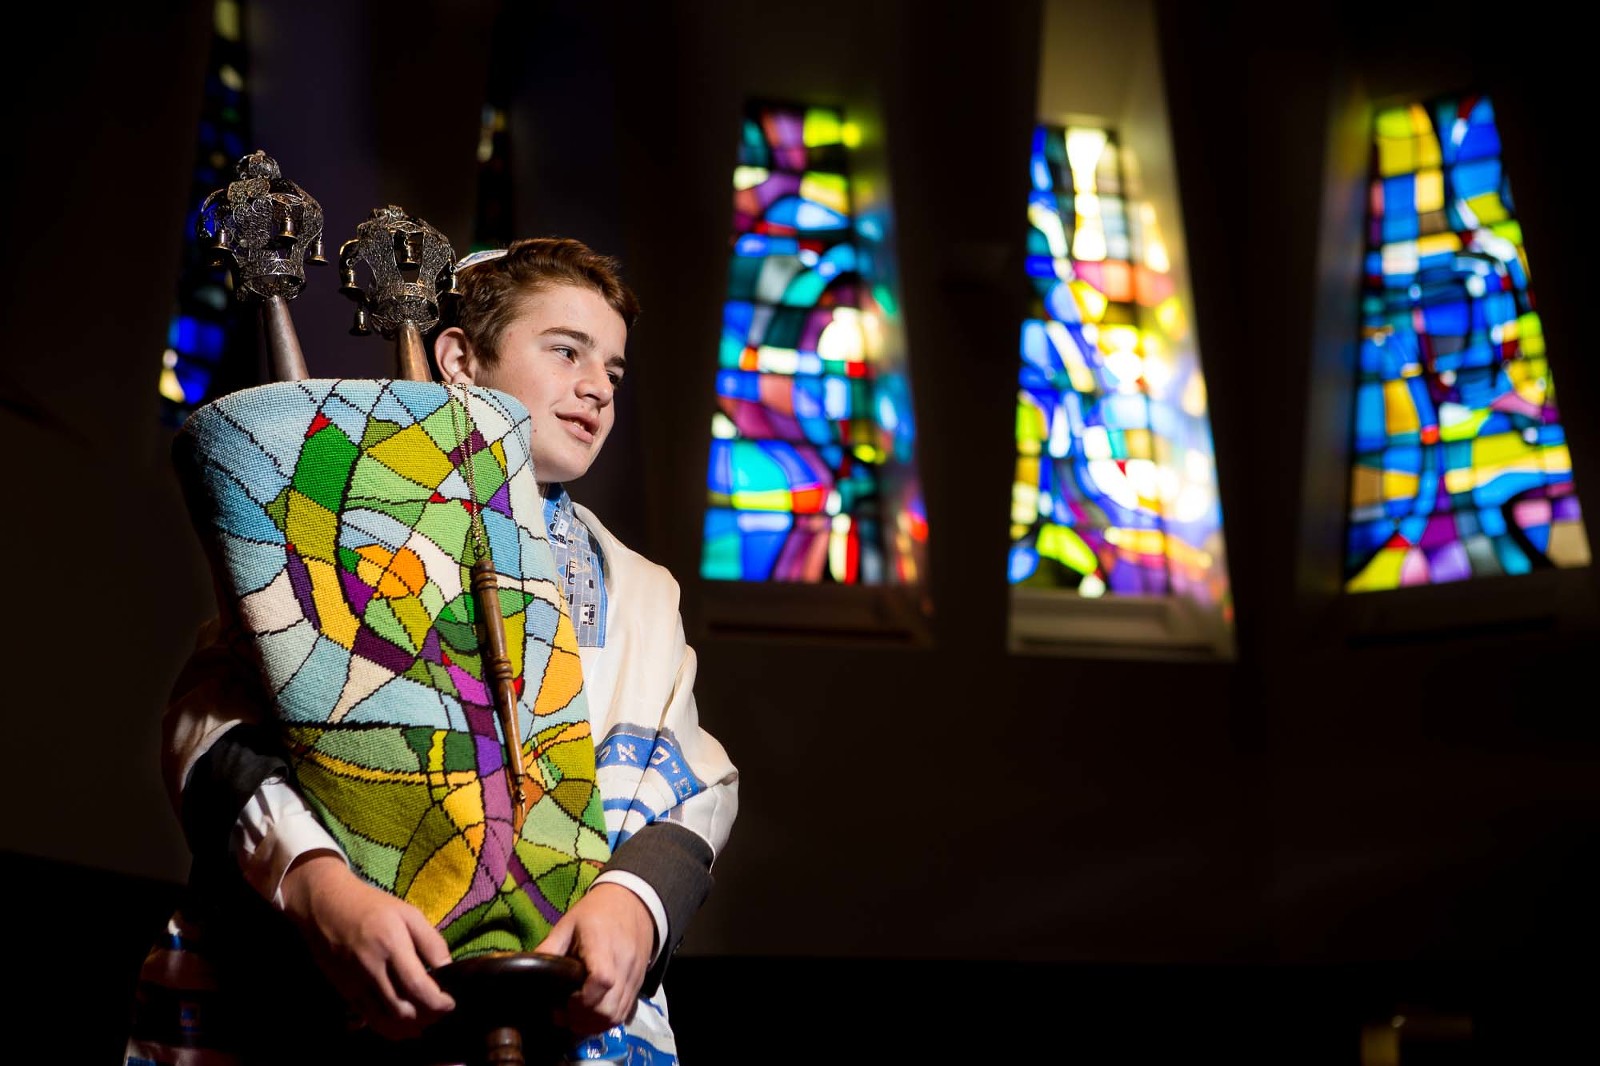 bar mitzvah boy stands holding the torah in front of some stained glass windows.